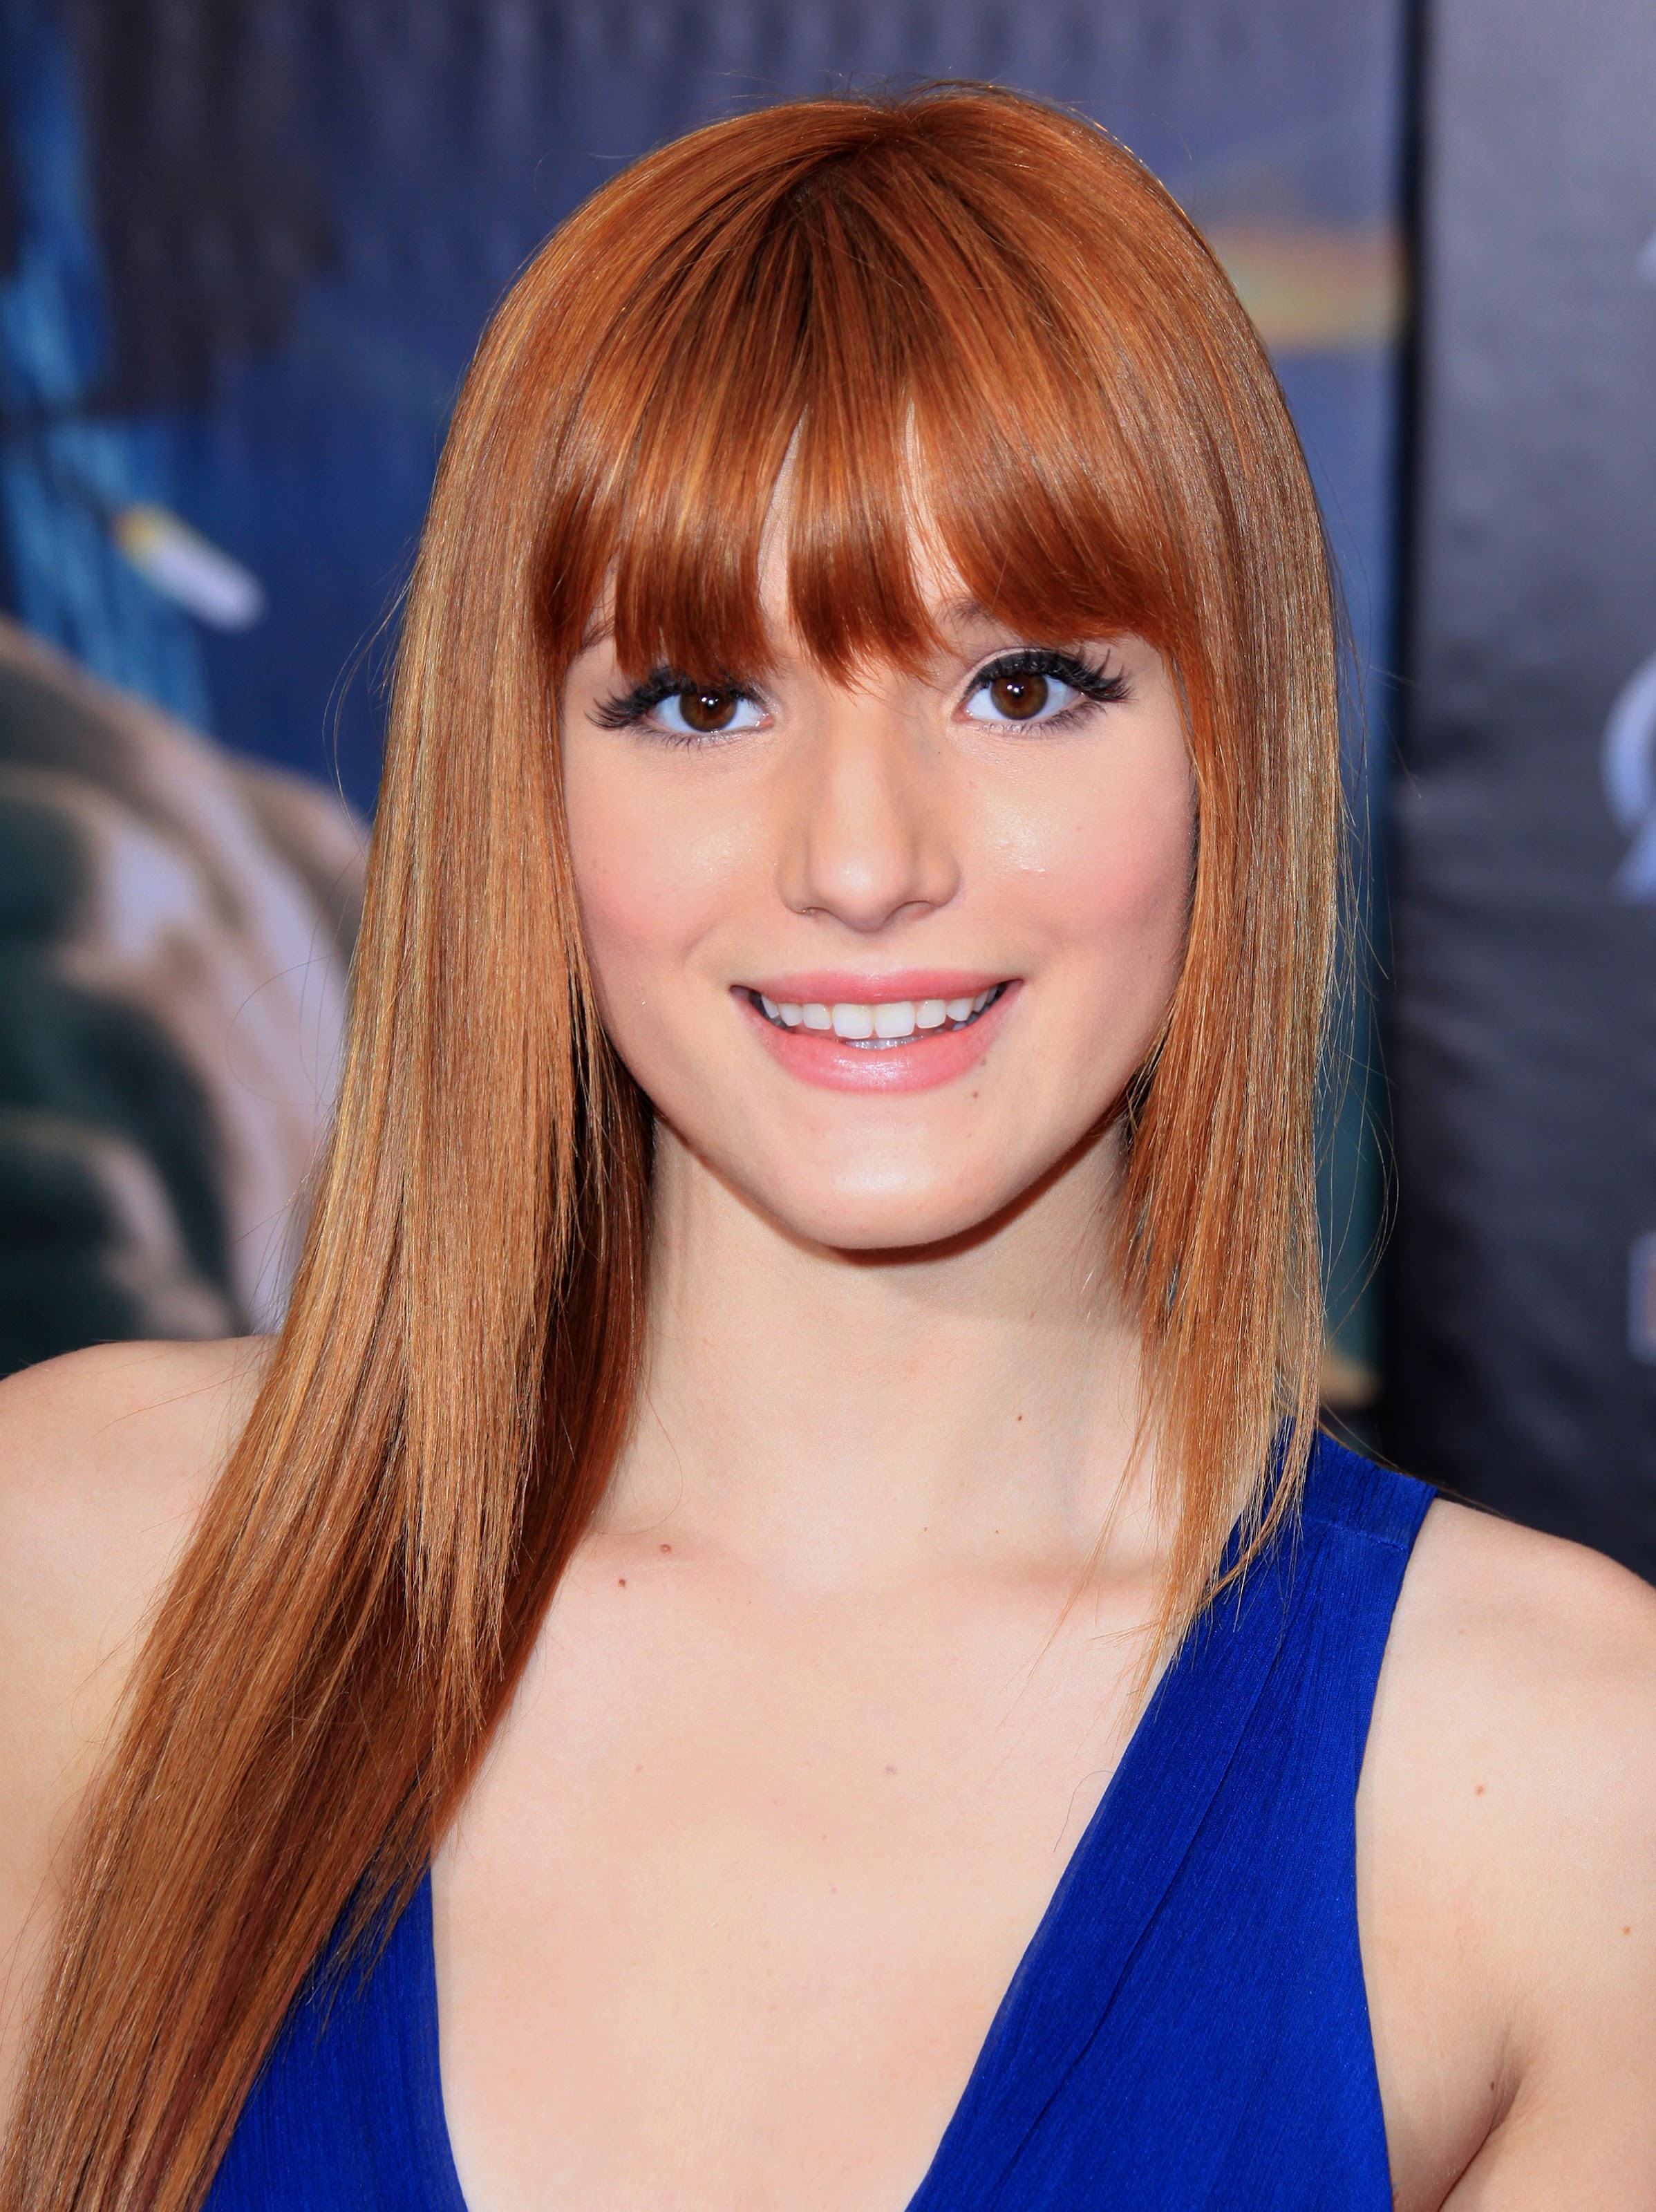 High Quality pictures of the stunning teen actress Bella Thorne. 